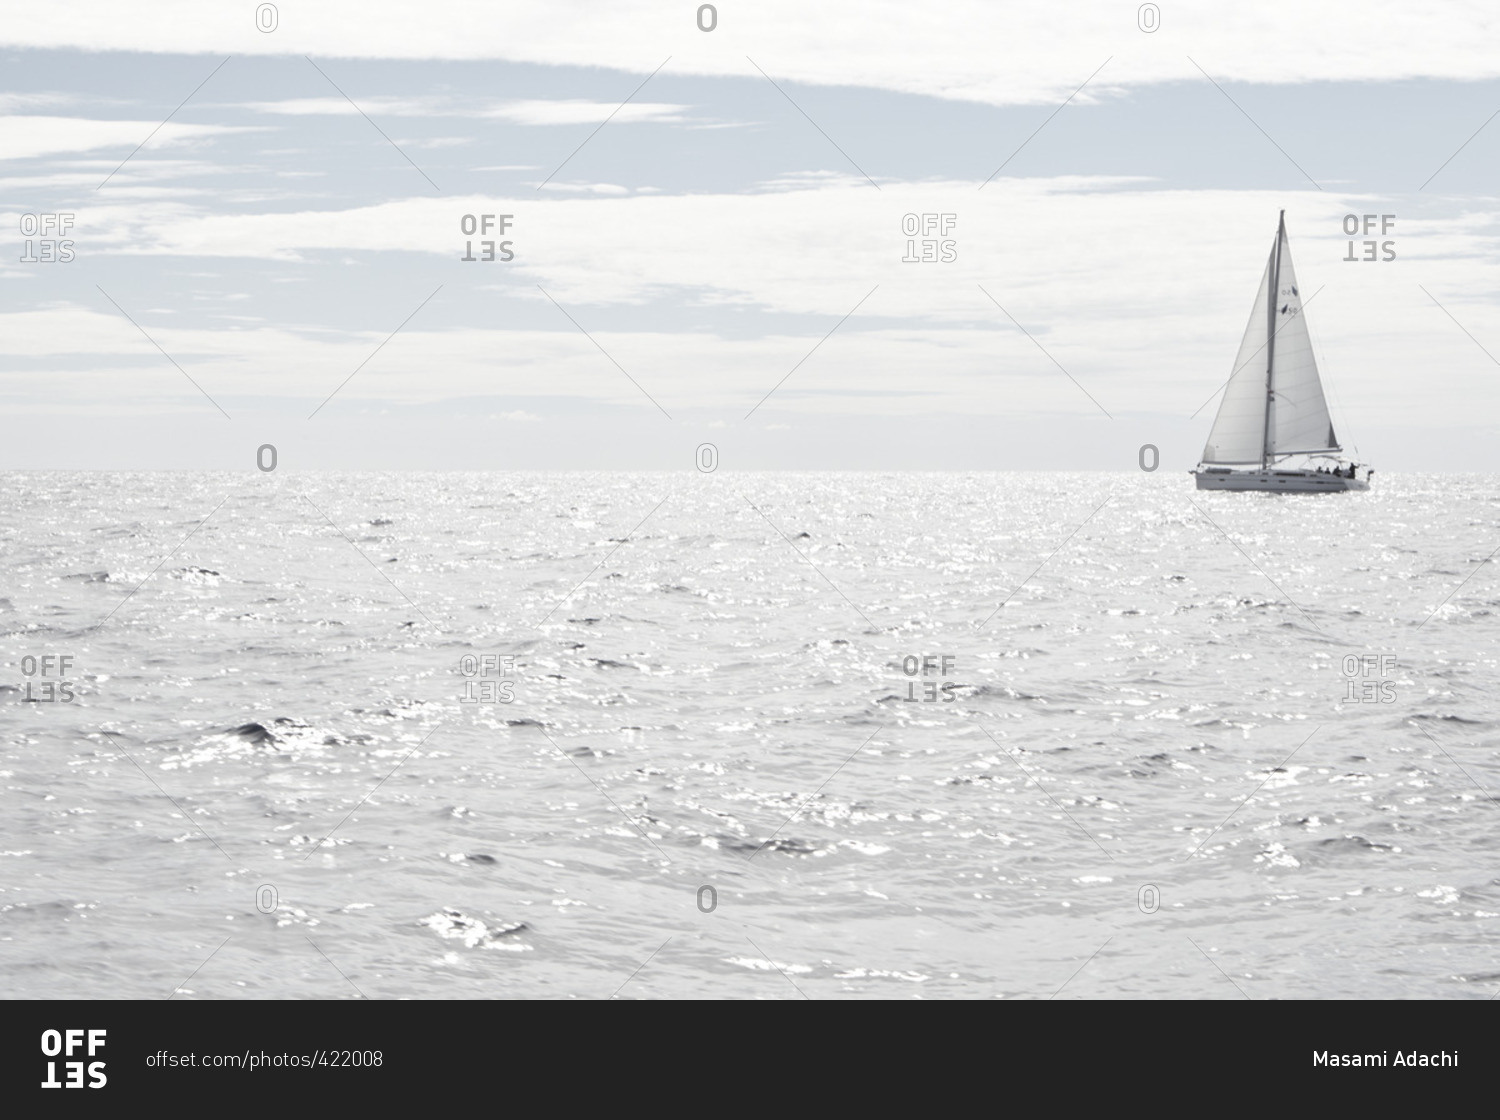 Monochromatic scene of a sailing yacht on the ocean at mid day